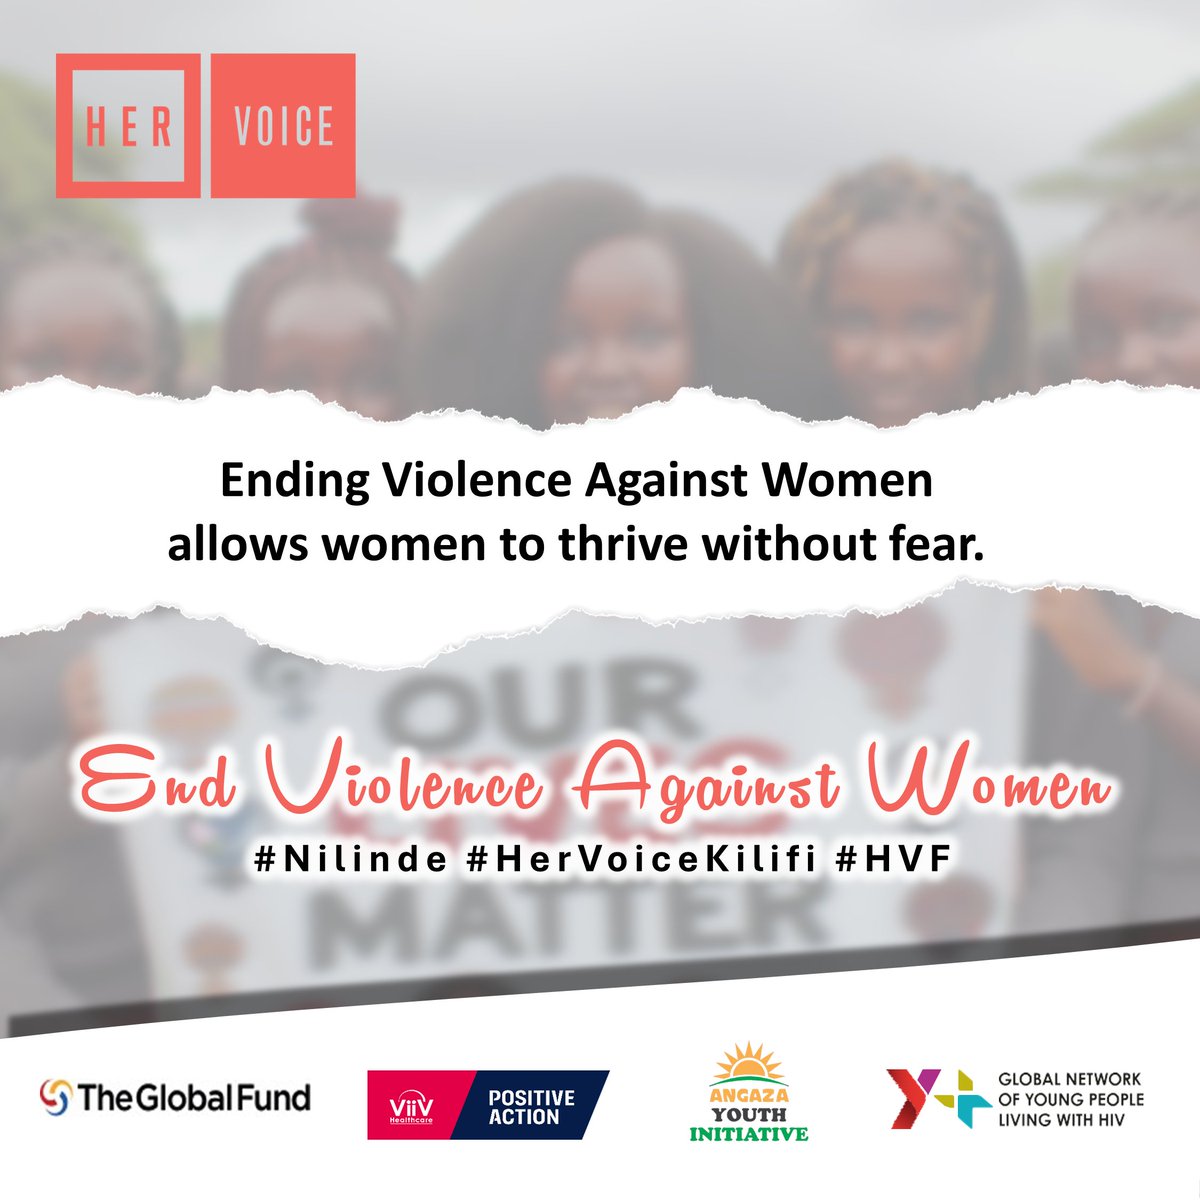 #AGYW, be the ambassadors of hope! 

Stand united against violence, educate your peers, and let's build a community where everyone feels safe and valued.  

#EndVAW #HVF #Nilinde #HERVoiceKilifi